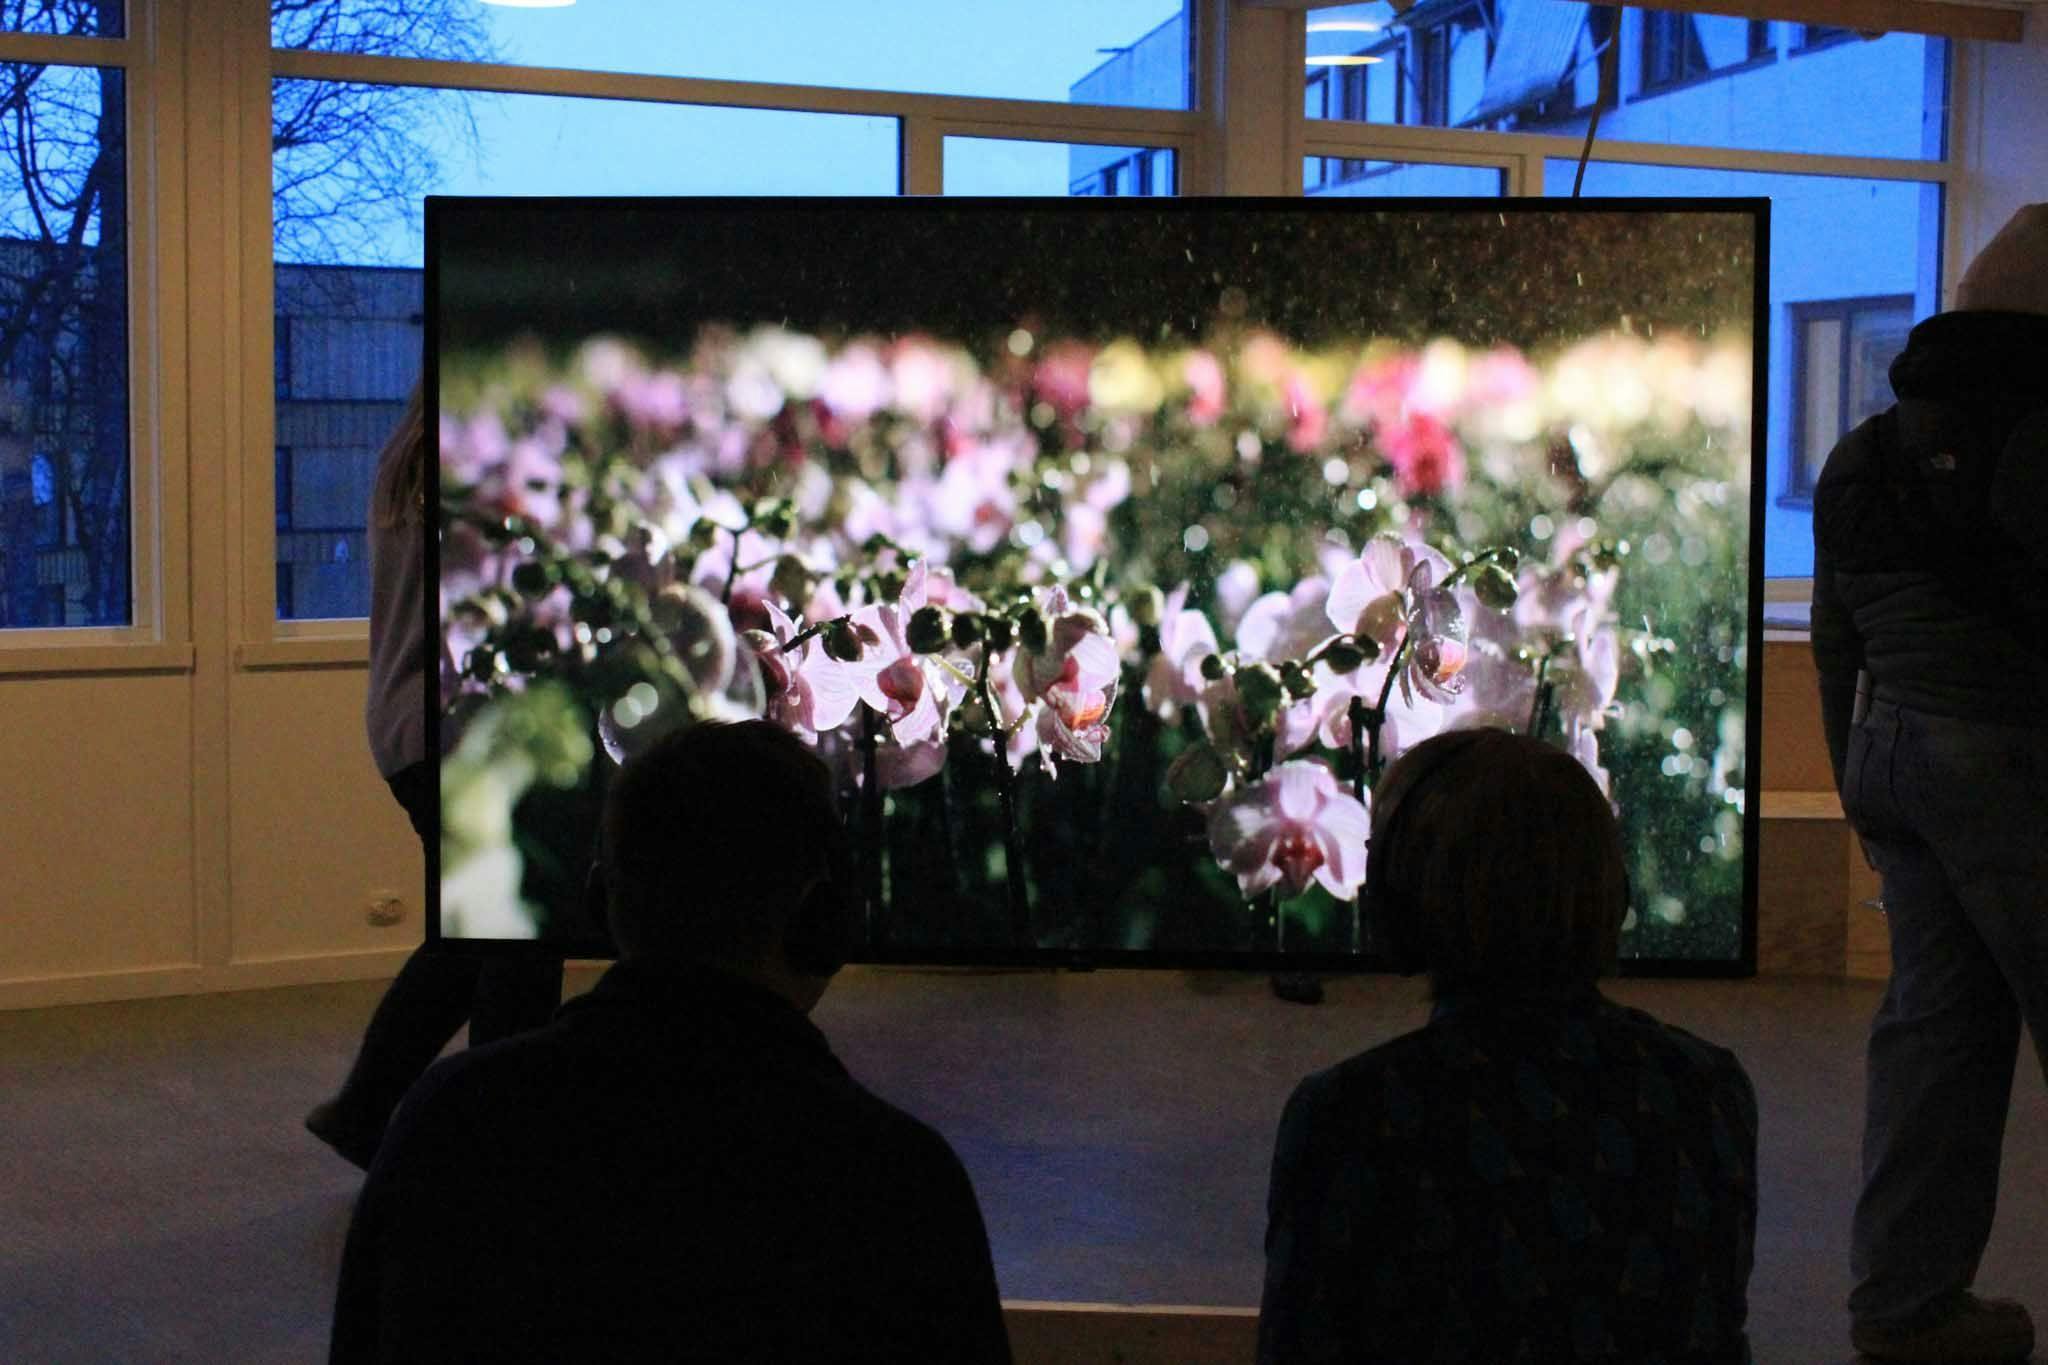 Two people sit in front of a large TV screen showing flowers. 